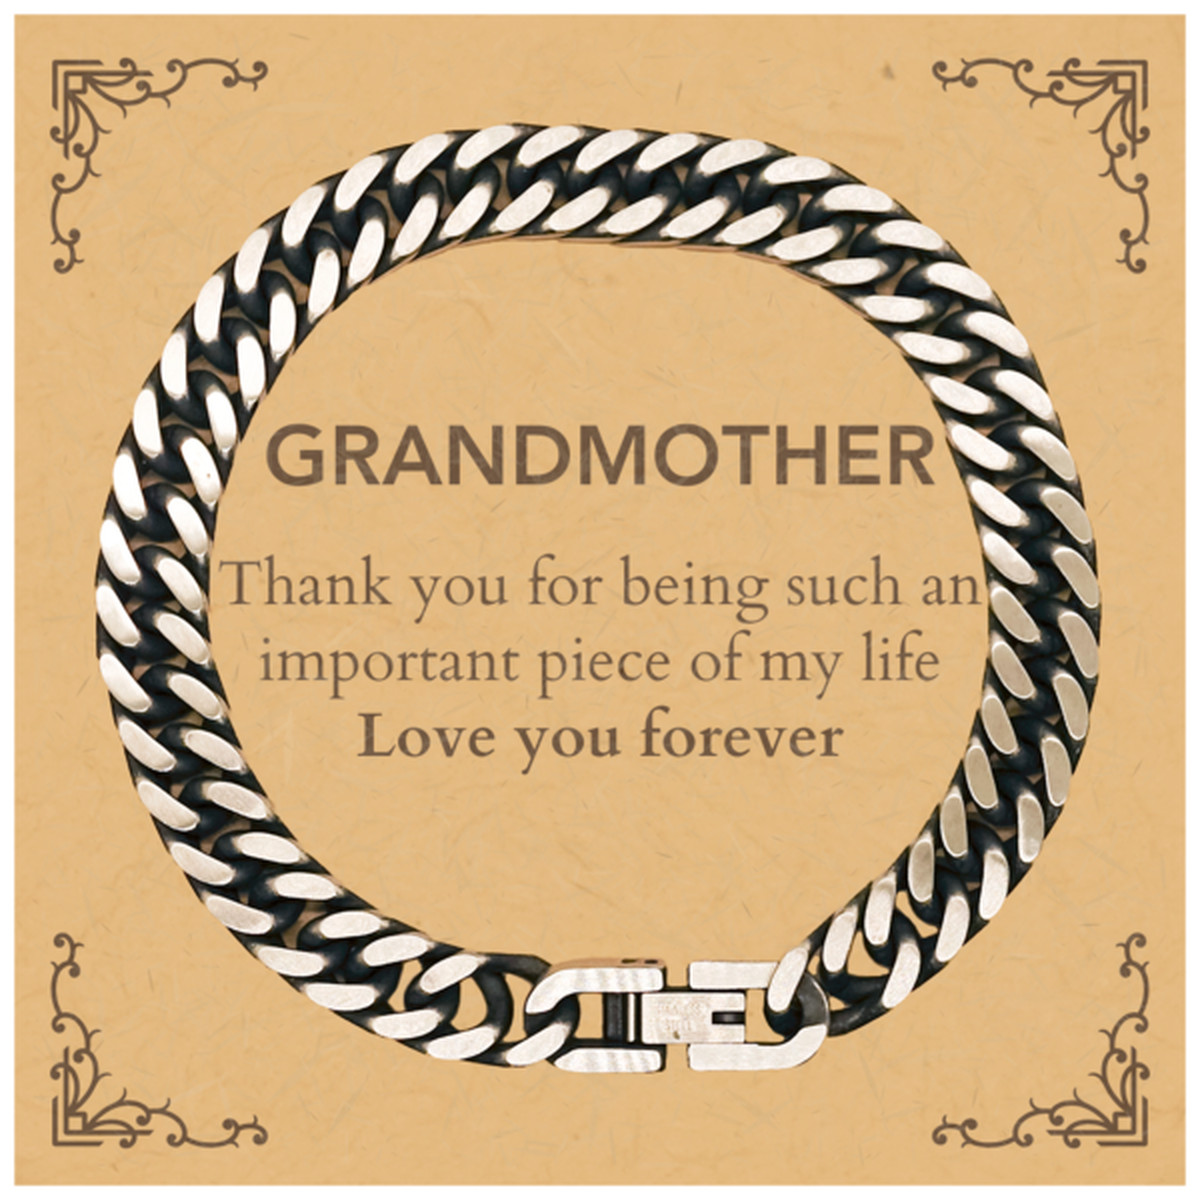 Appropriate Grandmother Cuban Link Chain Bracelet Epic Birthday Gifts for Grandmother Thank you for being such an important piece of my life Grandmother Christmas Mothers Fathers Day